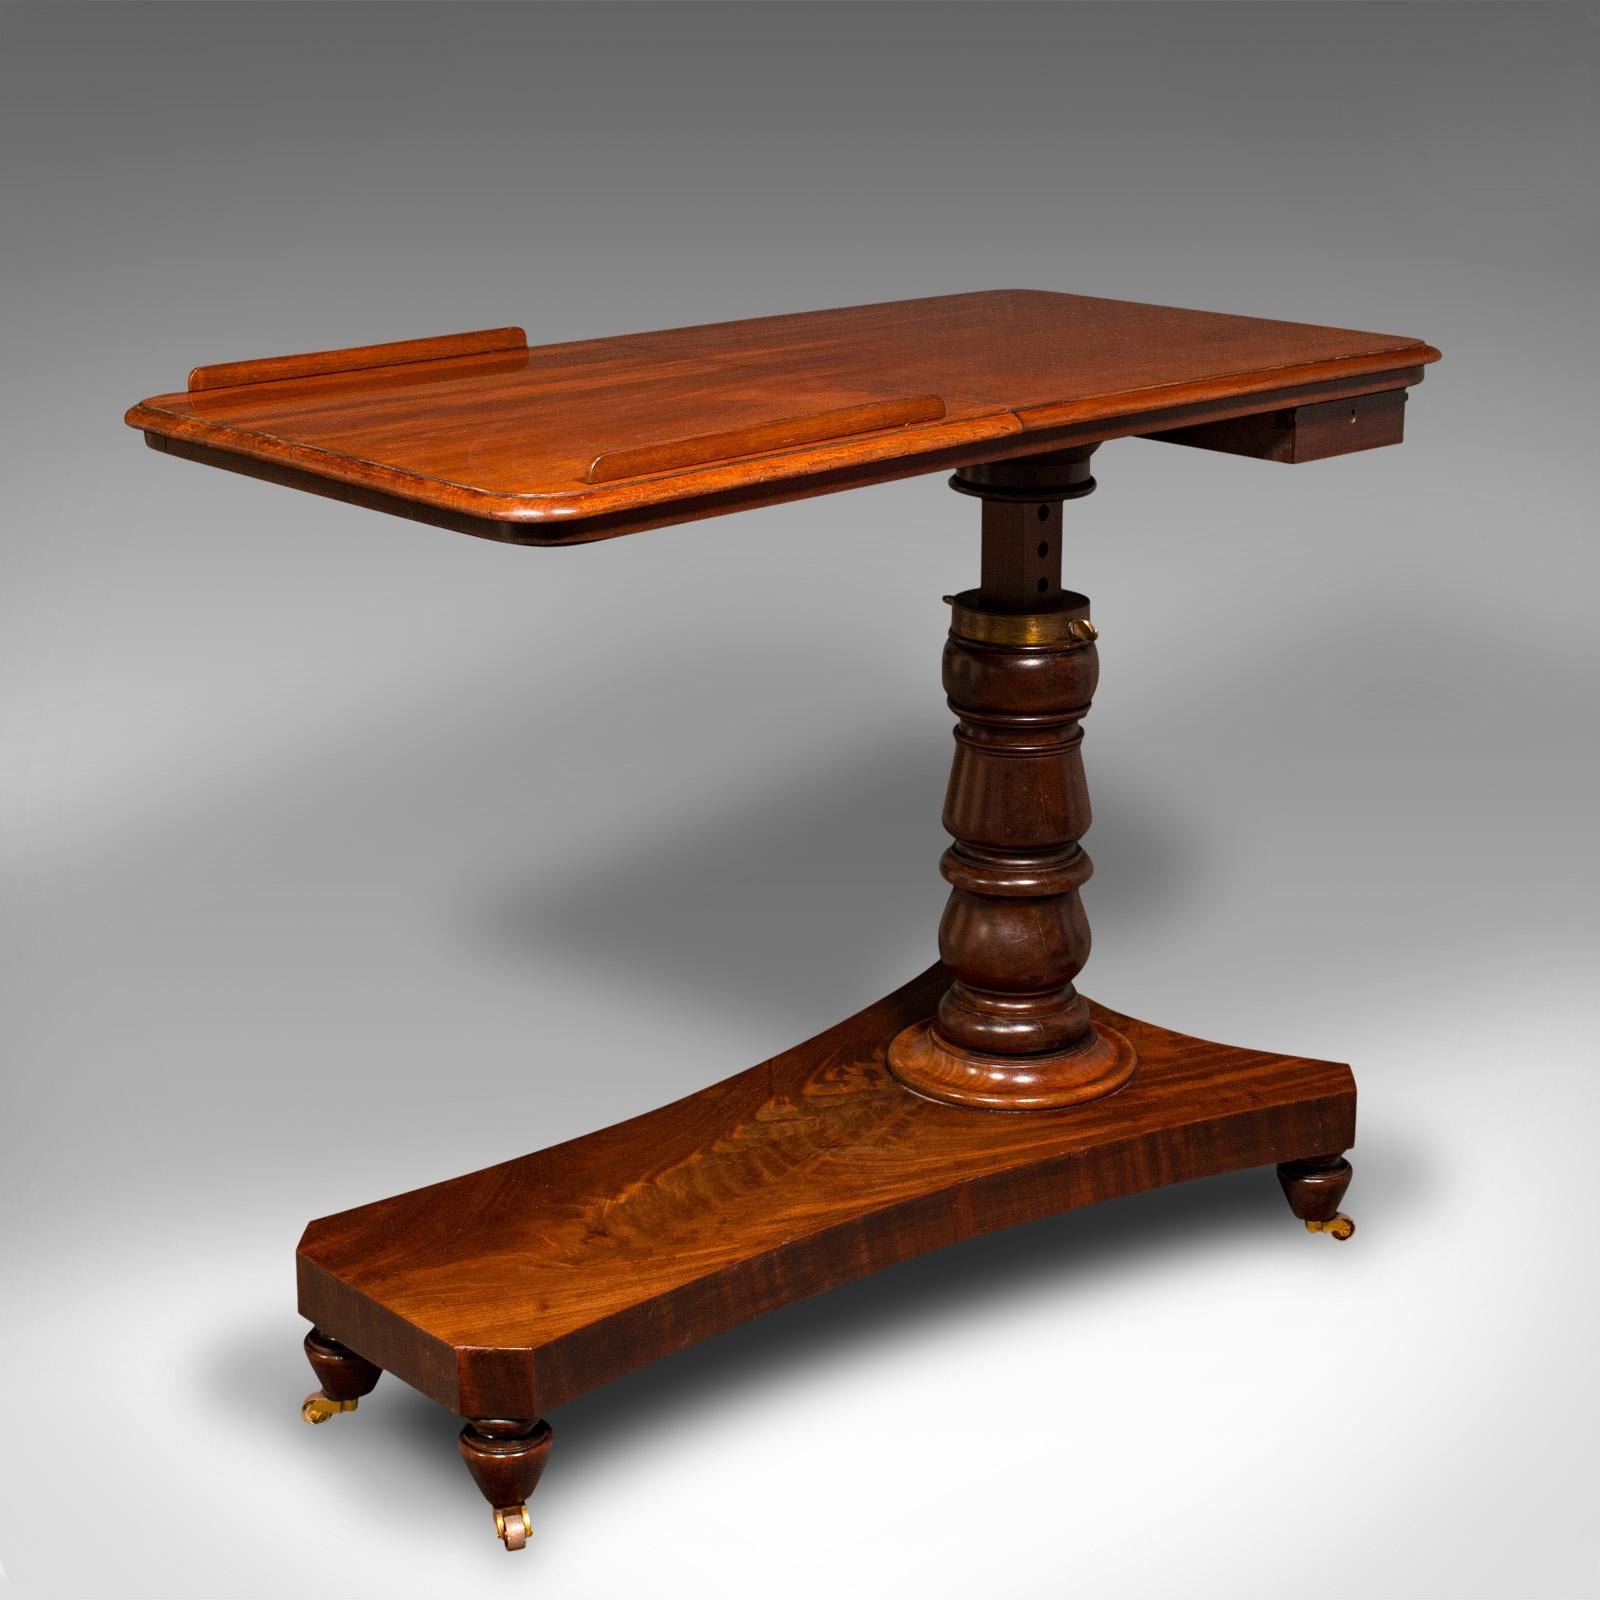 This is an antique gentleman's reading table. An English, mahogany adjustable cantilever writing desk, dating to the Victorian period, circa 1870.

Exceptional versatility to this attractive, well-crafted table
Displays a desirable aged patina